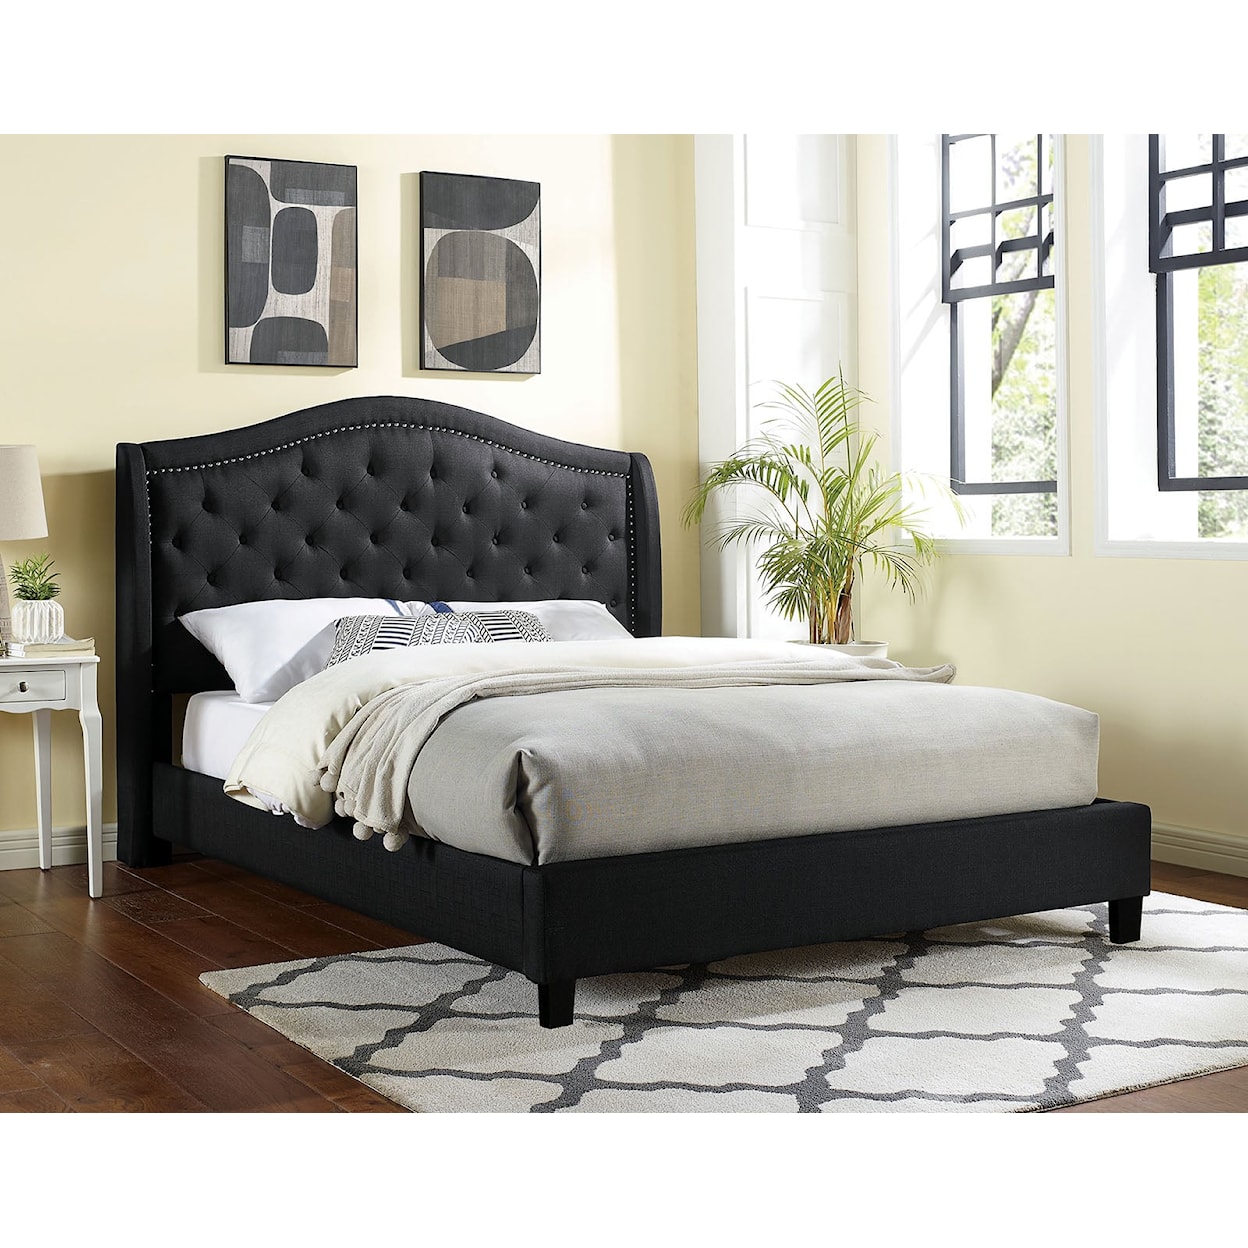 FUSA Carly Queen Bed, Black